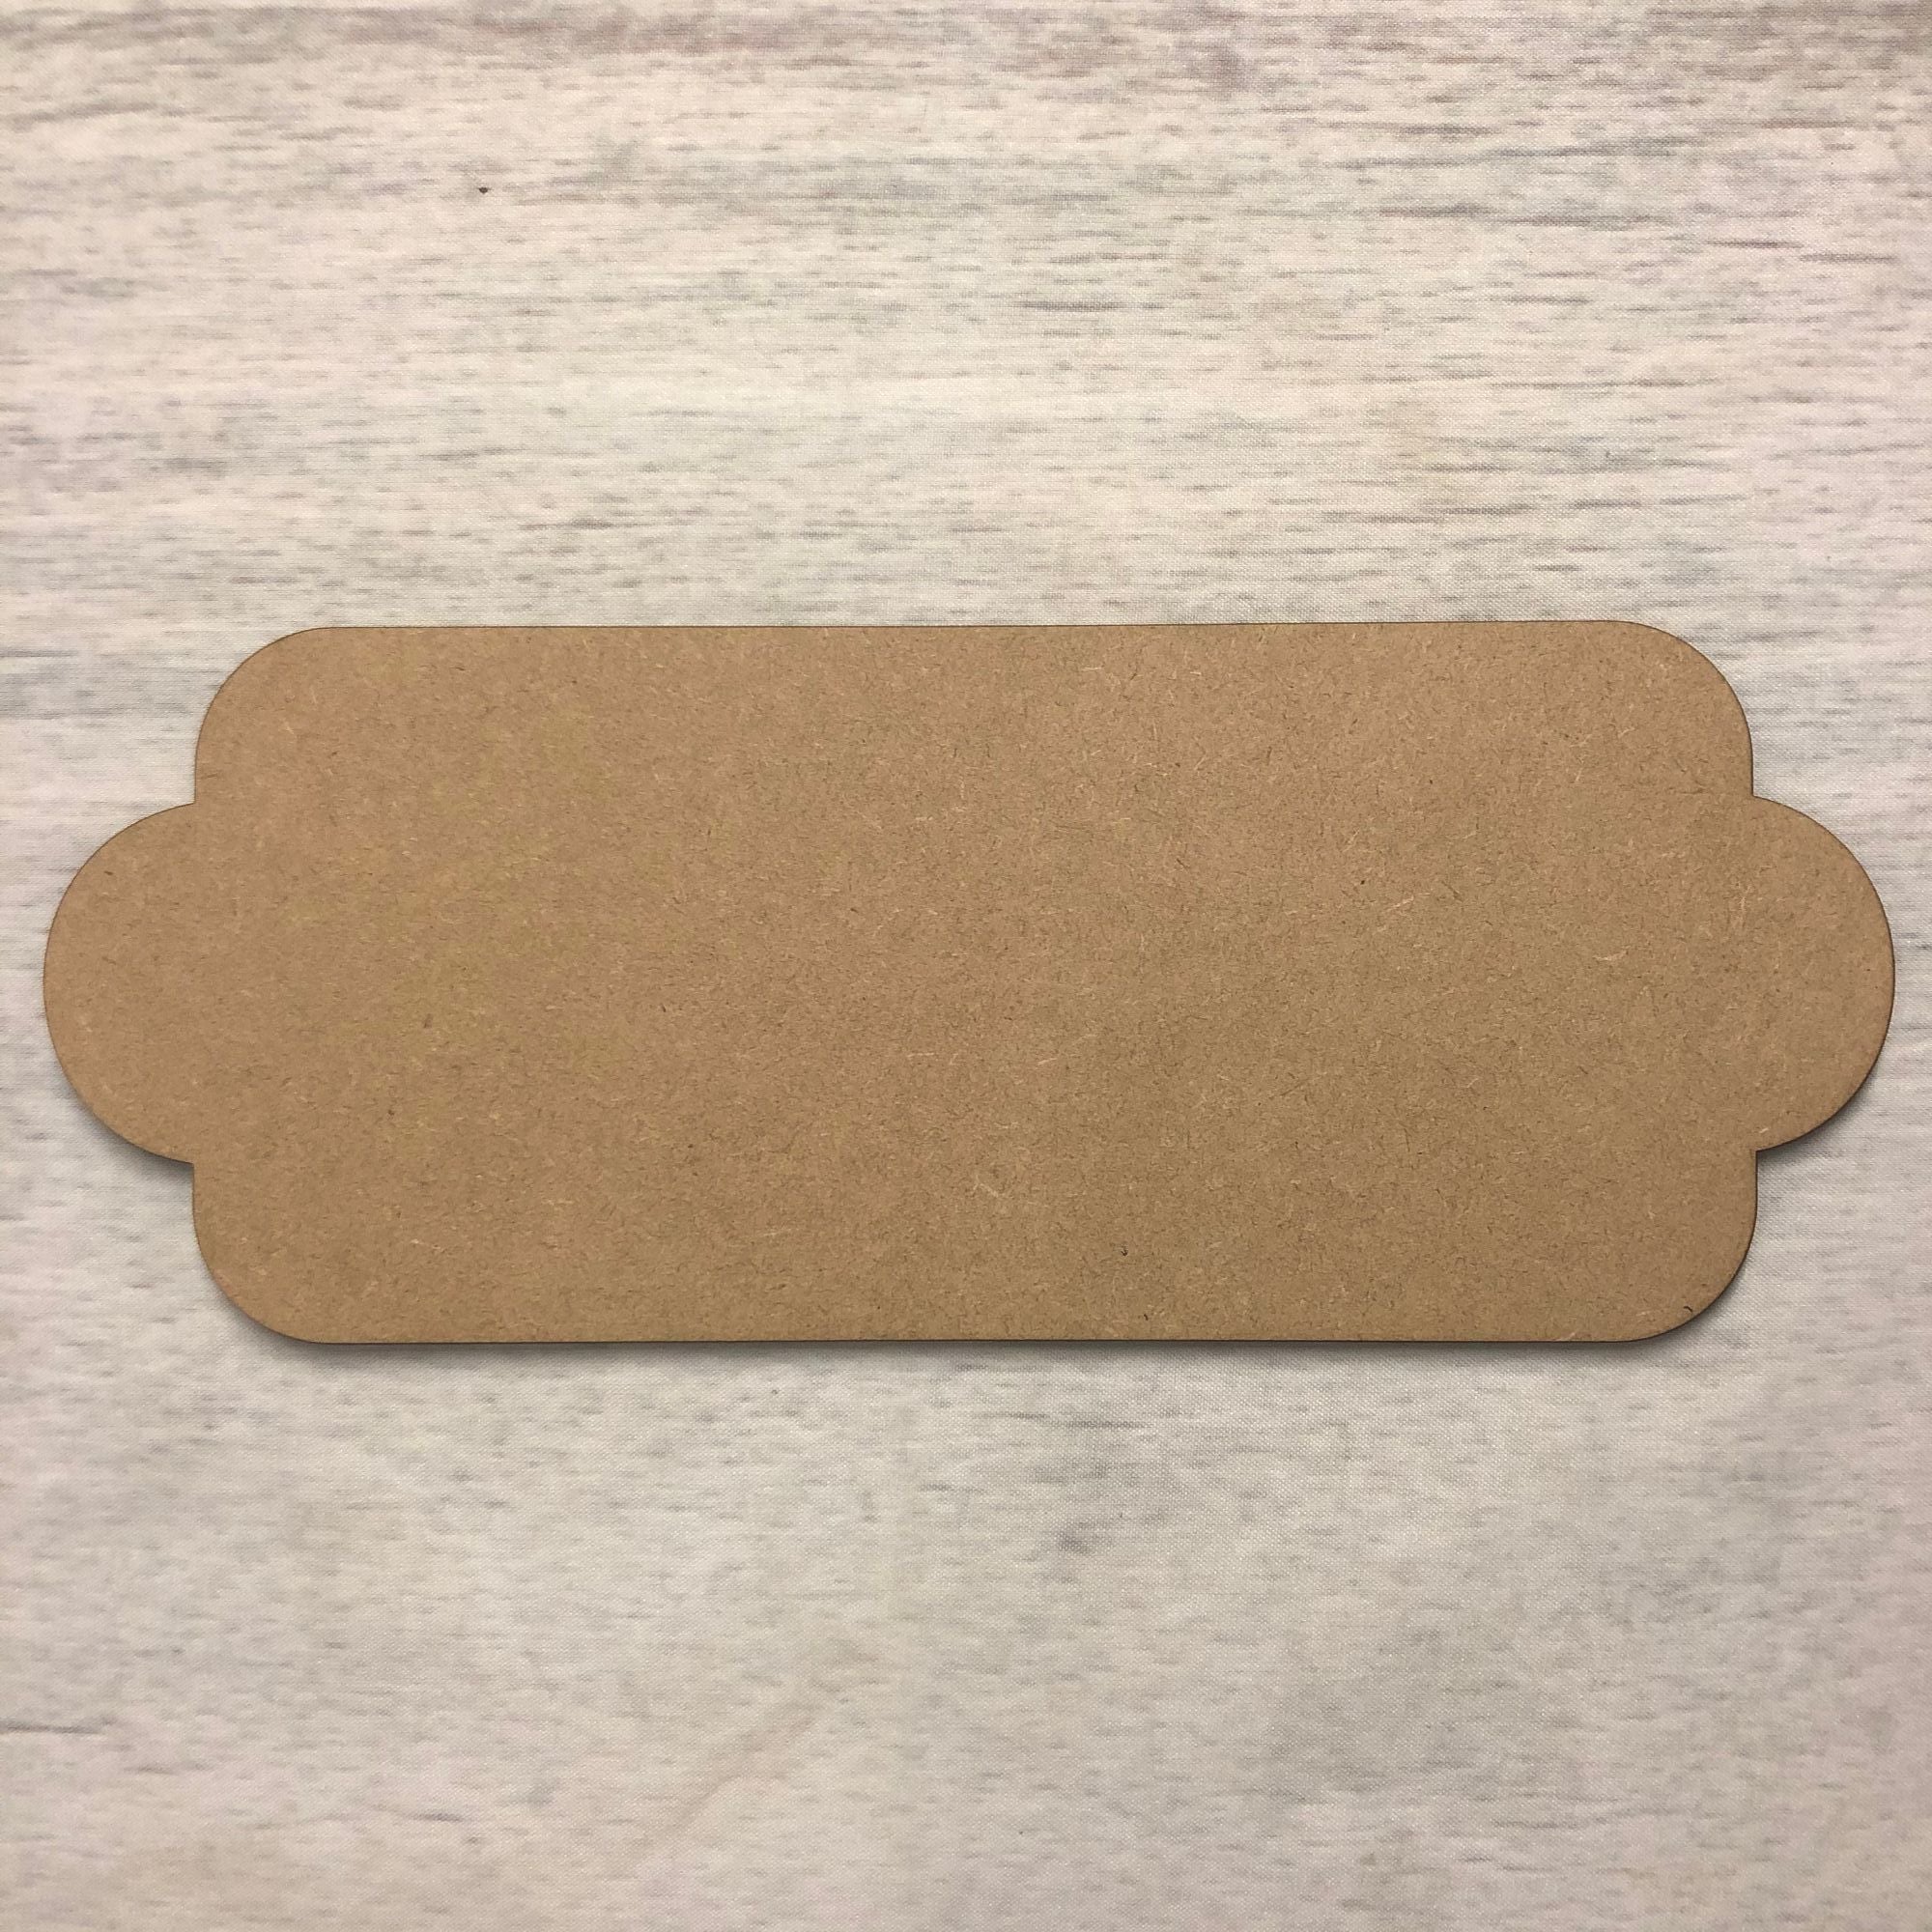 Blank name plaque - Station shaped